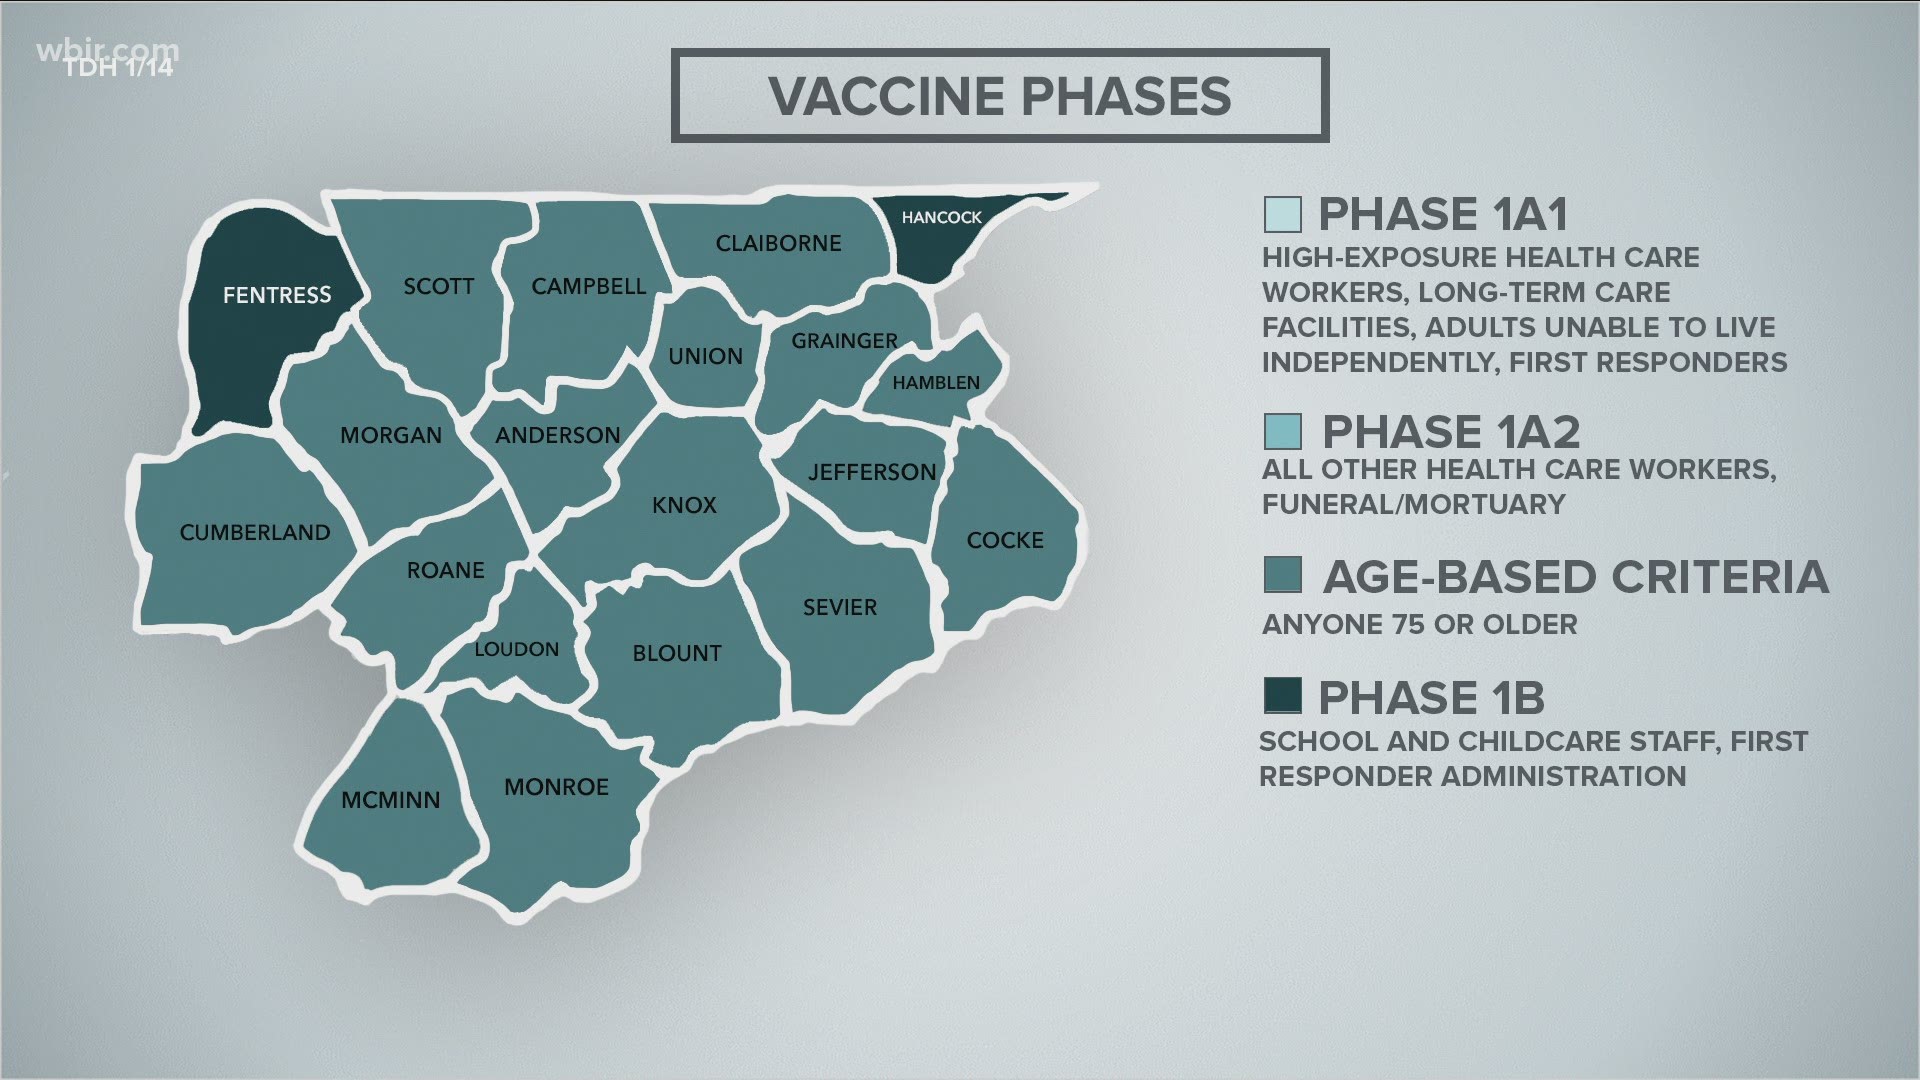 Kchd Launches Online Vaccine Portal No Slots Available For Jan 22 Appointments Wbircom